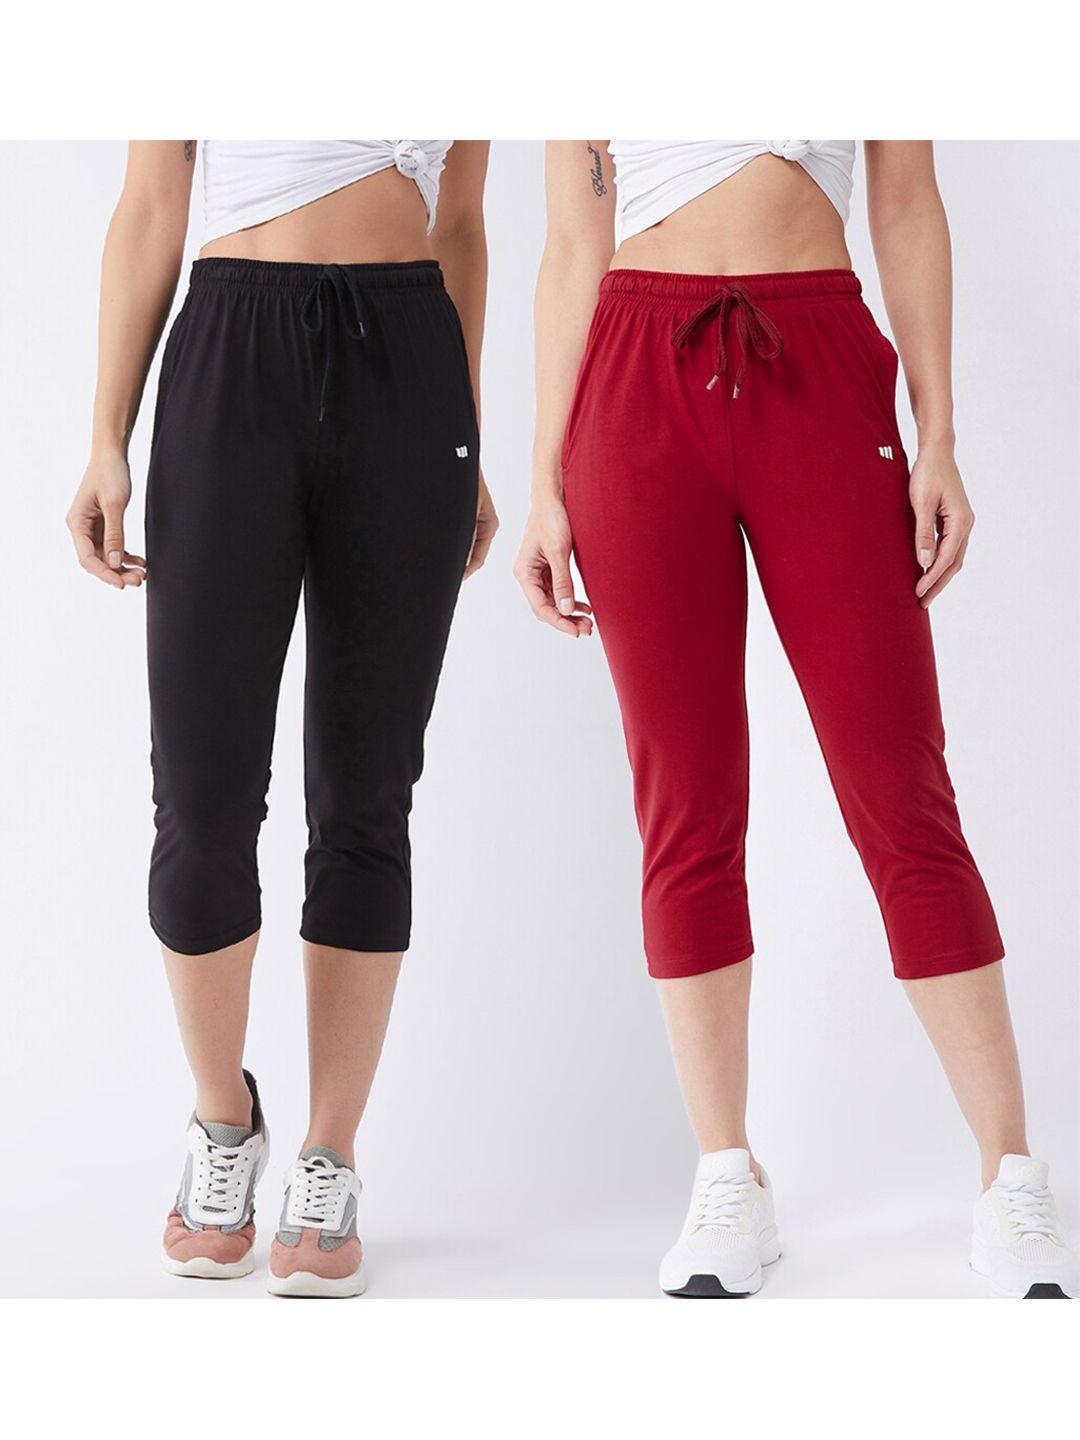 modeve women pack of 2 red & black solid solid mid-rise capris